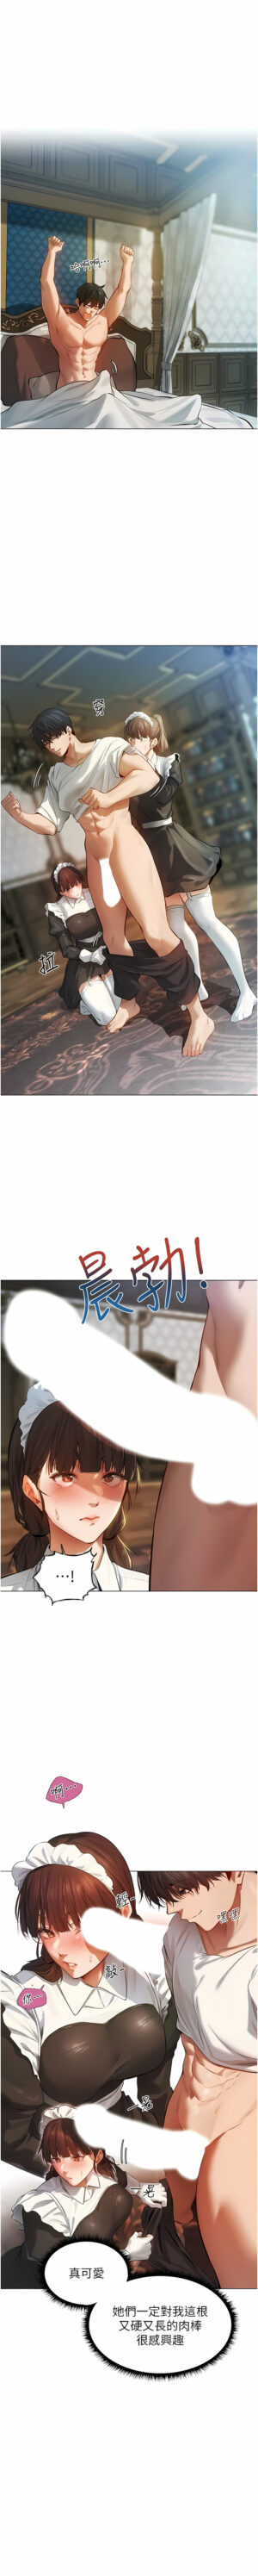 [ERO404 & Yoan & Oh gok Jeon do sa] Milf Hunting in Another World | 人妻猎人 | 人妻獵人 (1-10) [Chinese] [Ongoing]